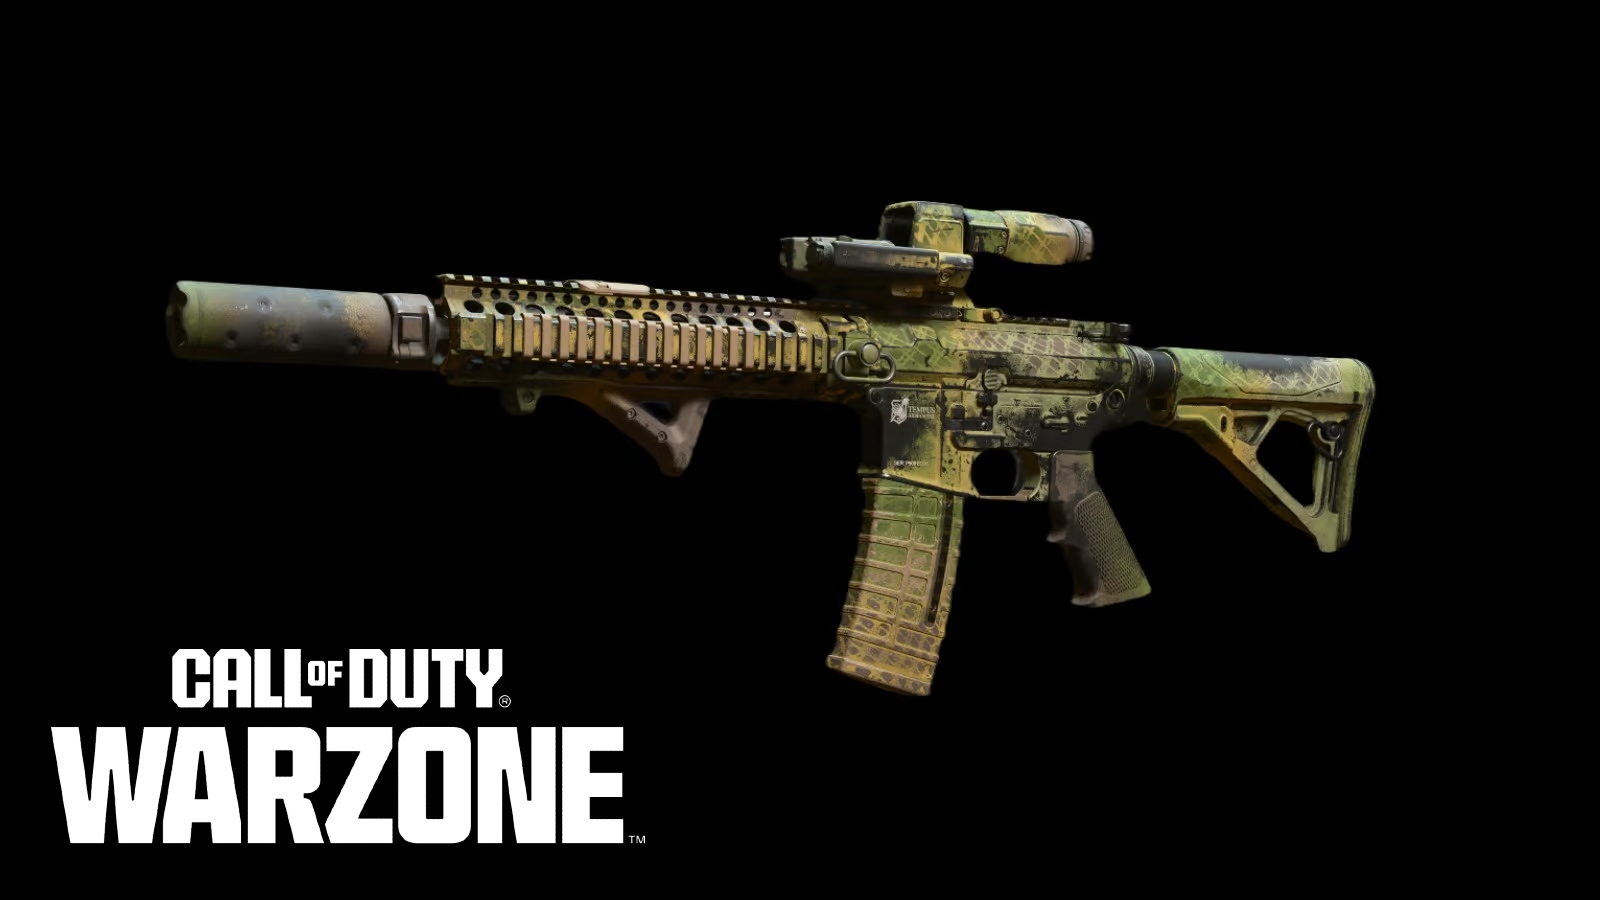 Warzone 2.0: Best M4 loadout to dominate Resurgence